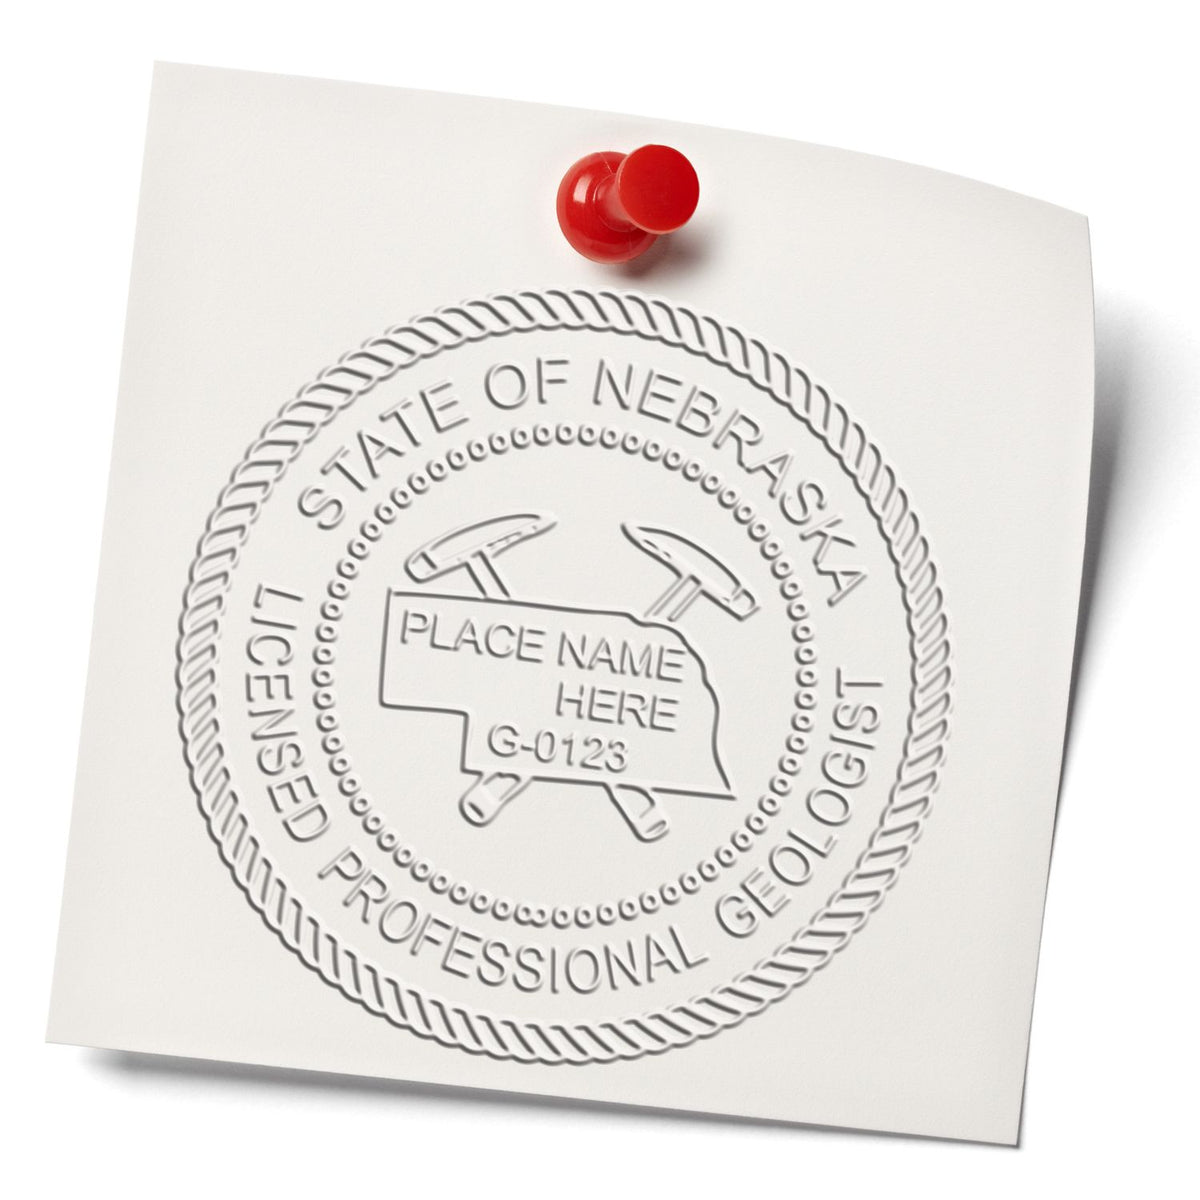 An in use photo of the Soft Nebraska Professional Geologist Seal showing a sample imprint on a cardstock